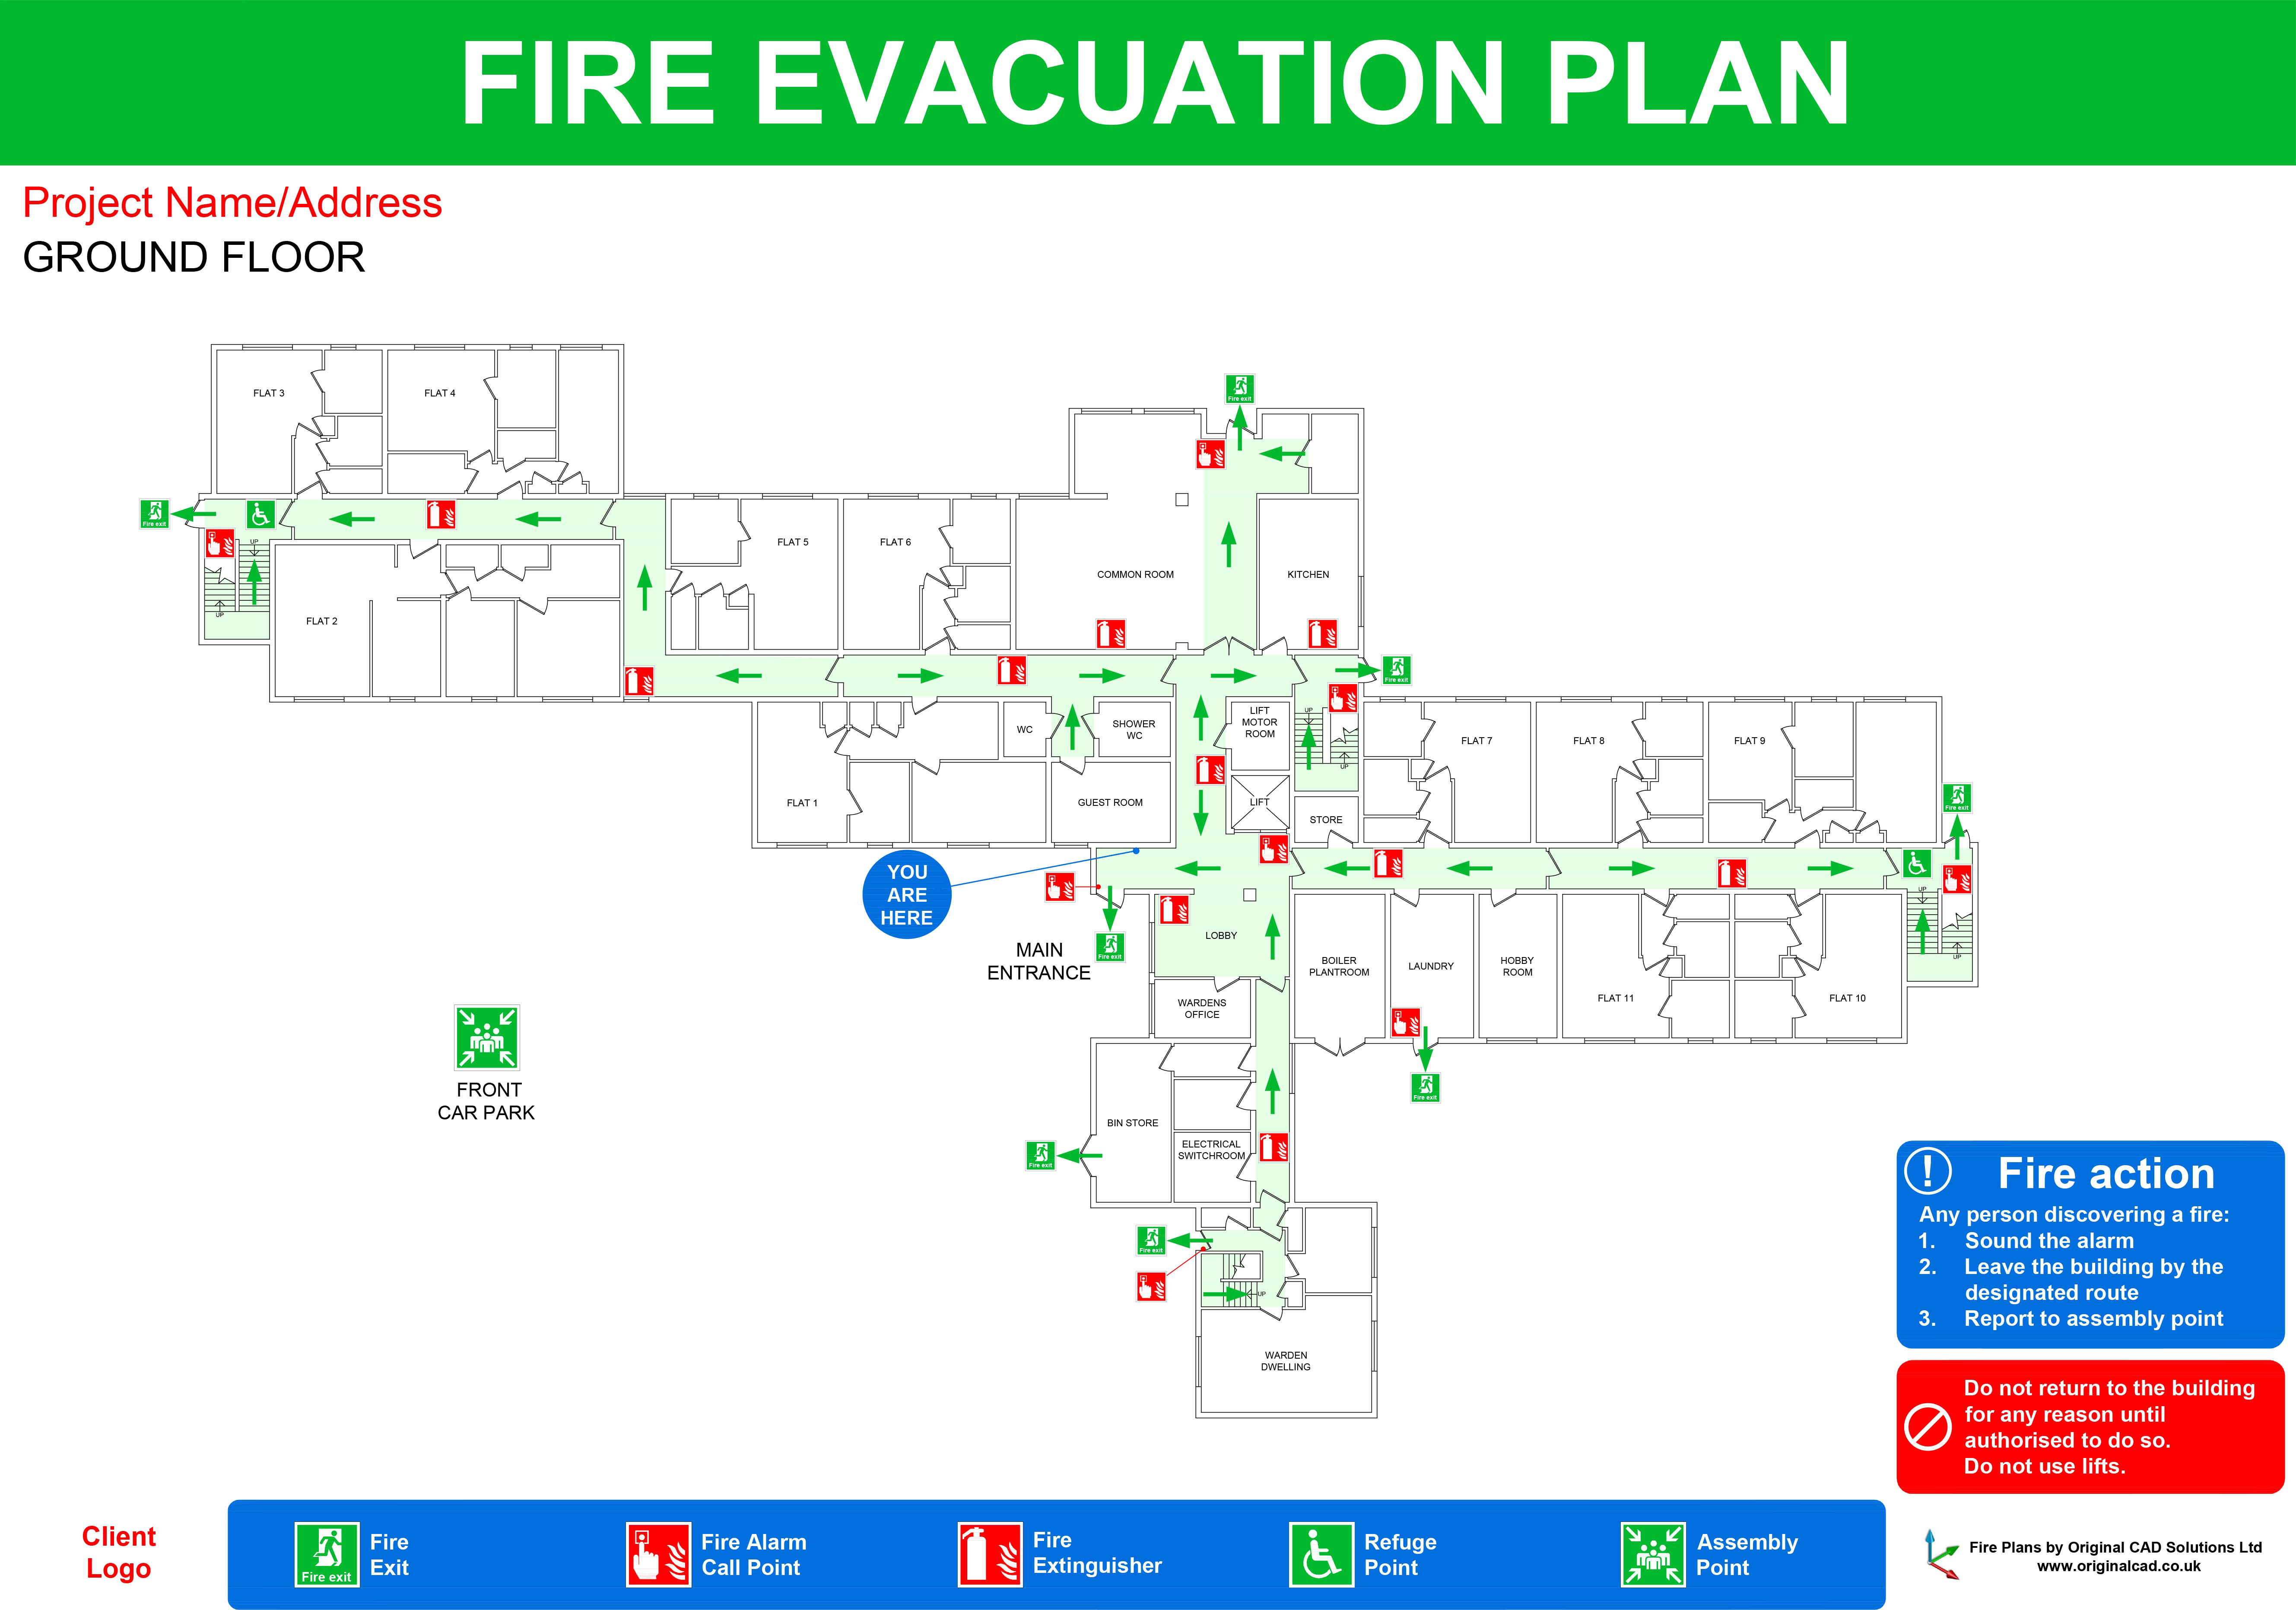 How to prepare an emergency evacuation plan | Fireco